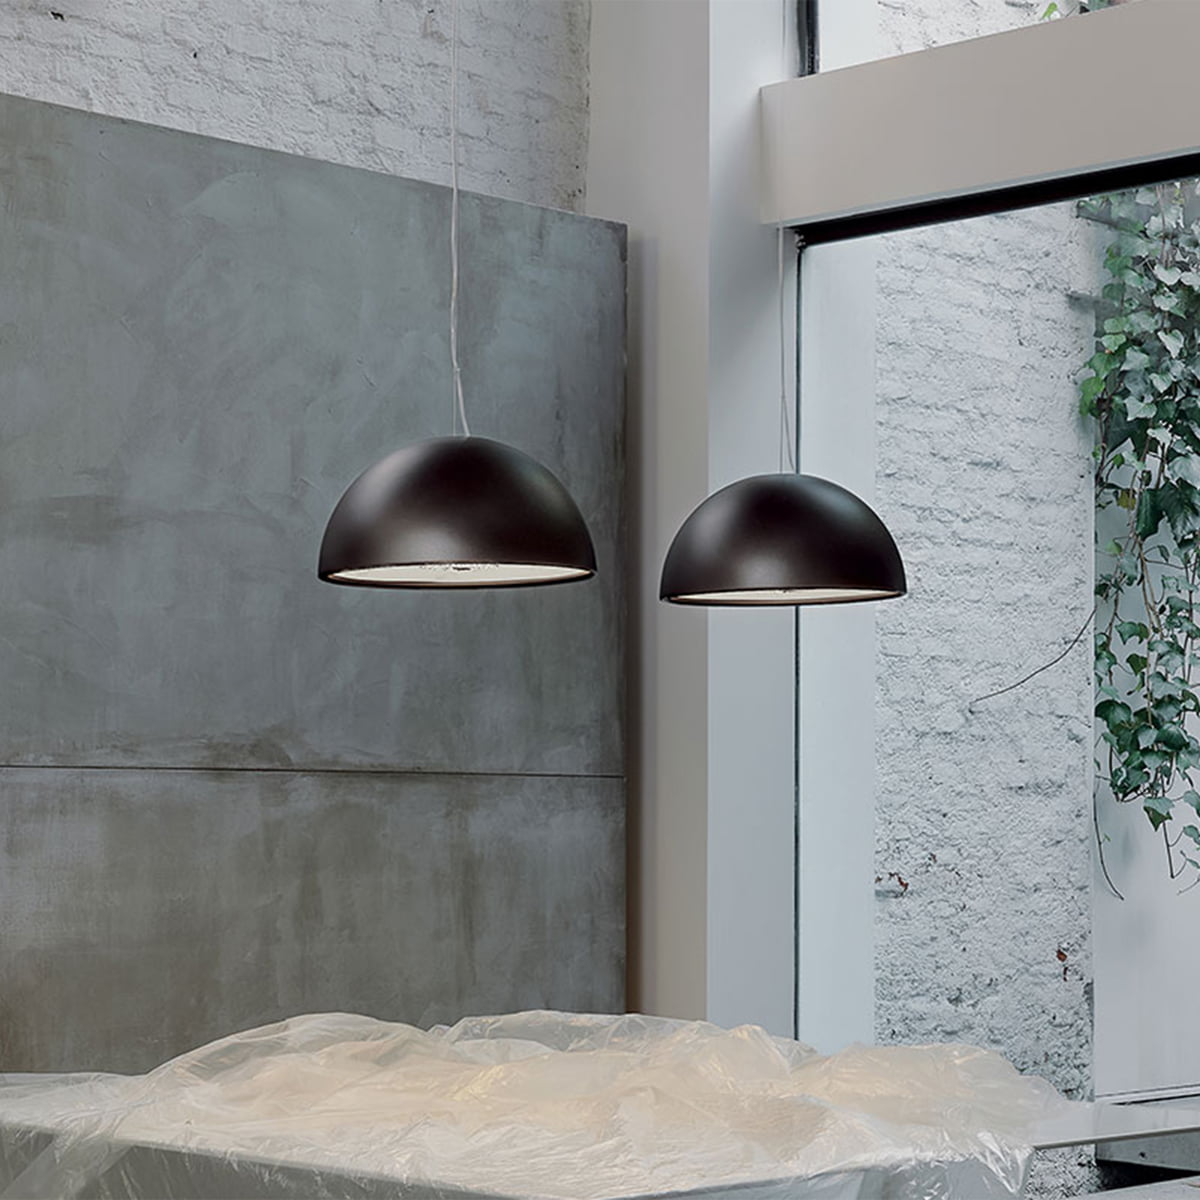 Andrew Halliday værdighed finger Flos - Skygarden Small LED Pendant light | Connox